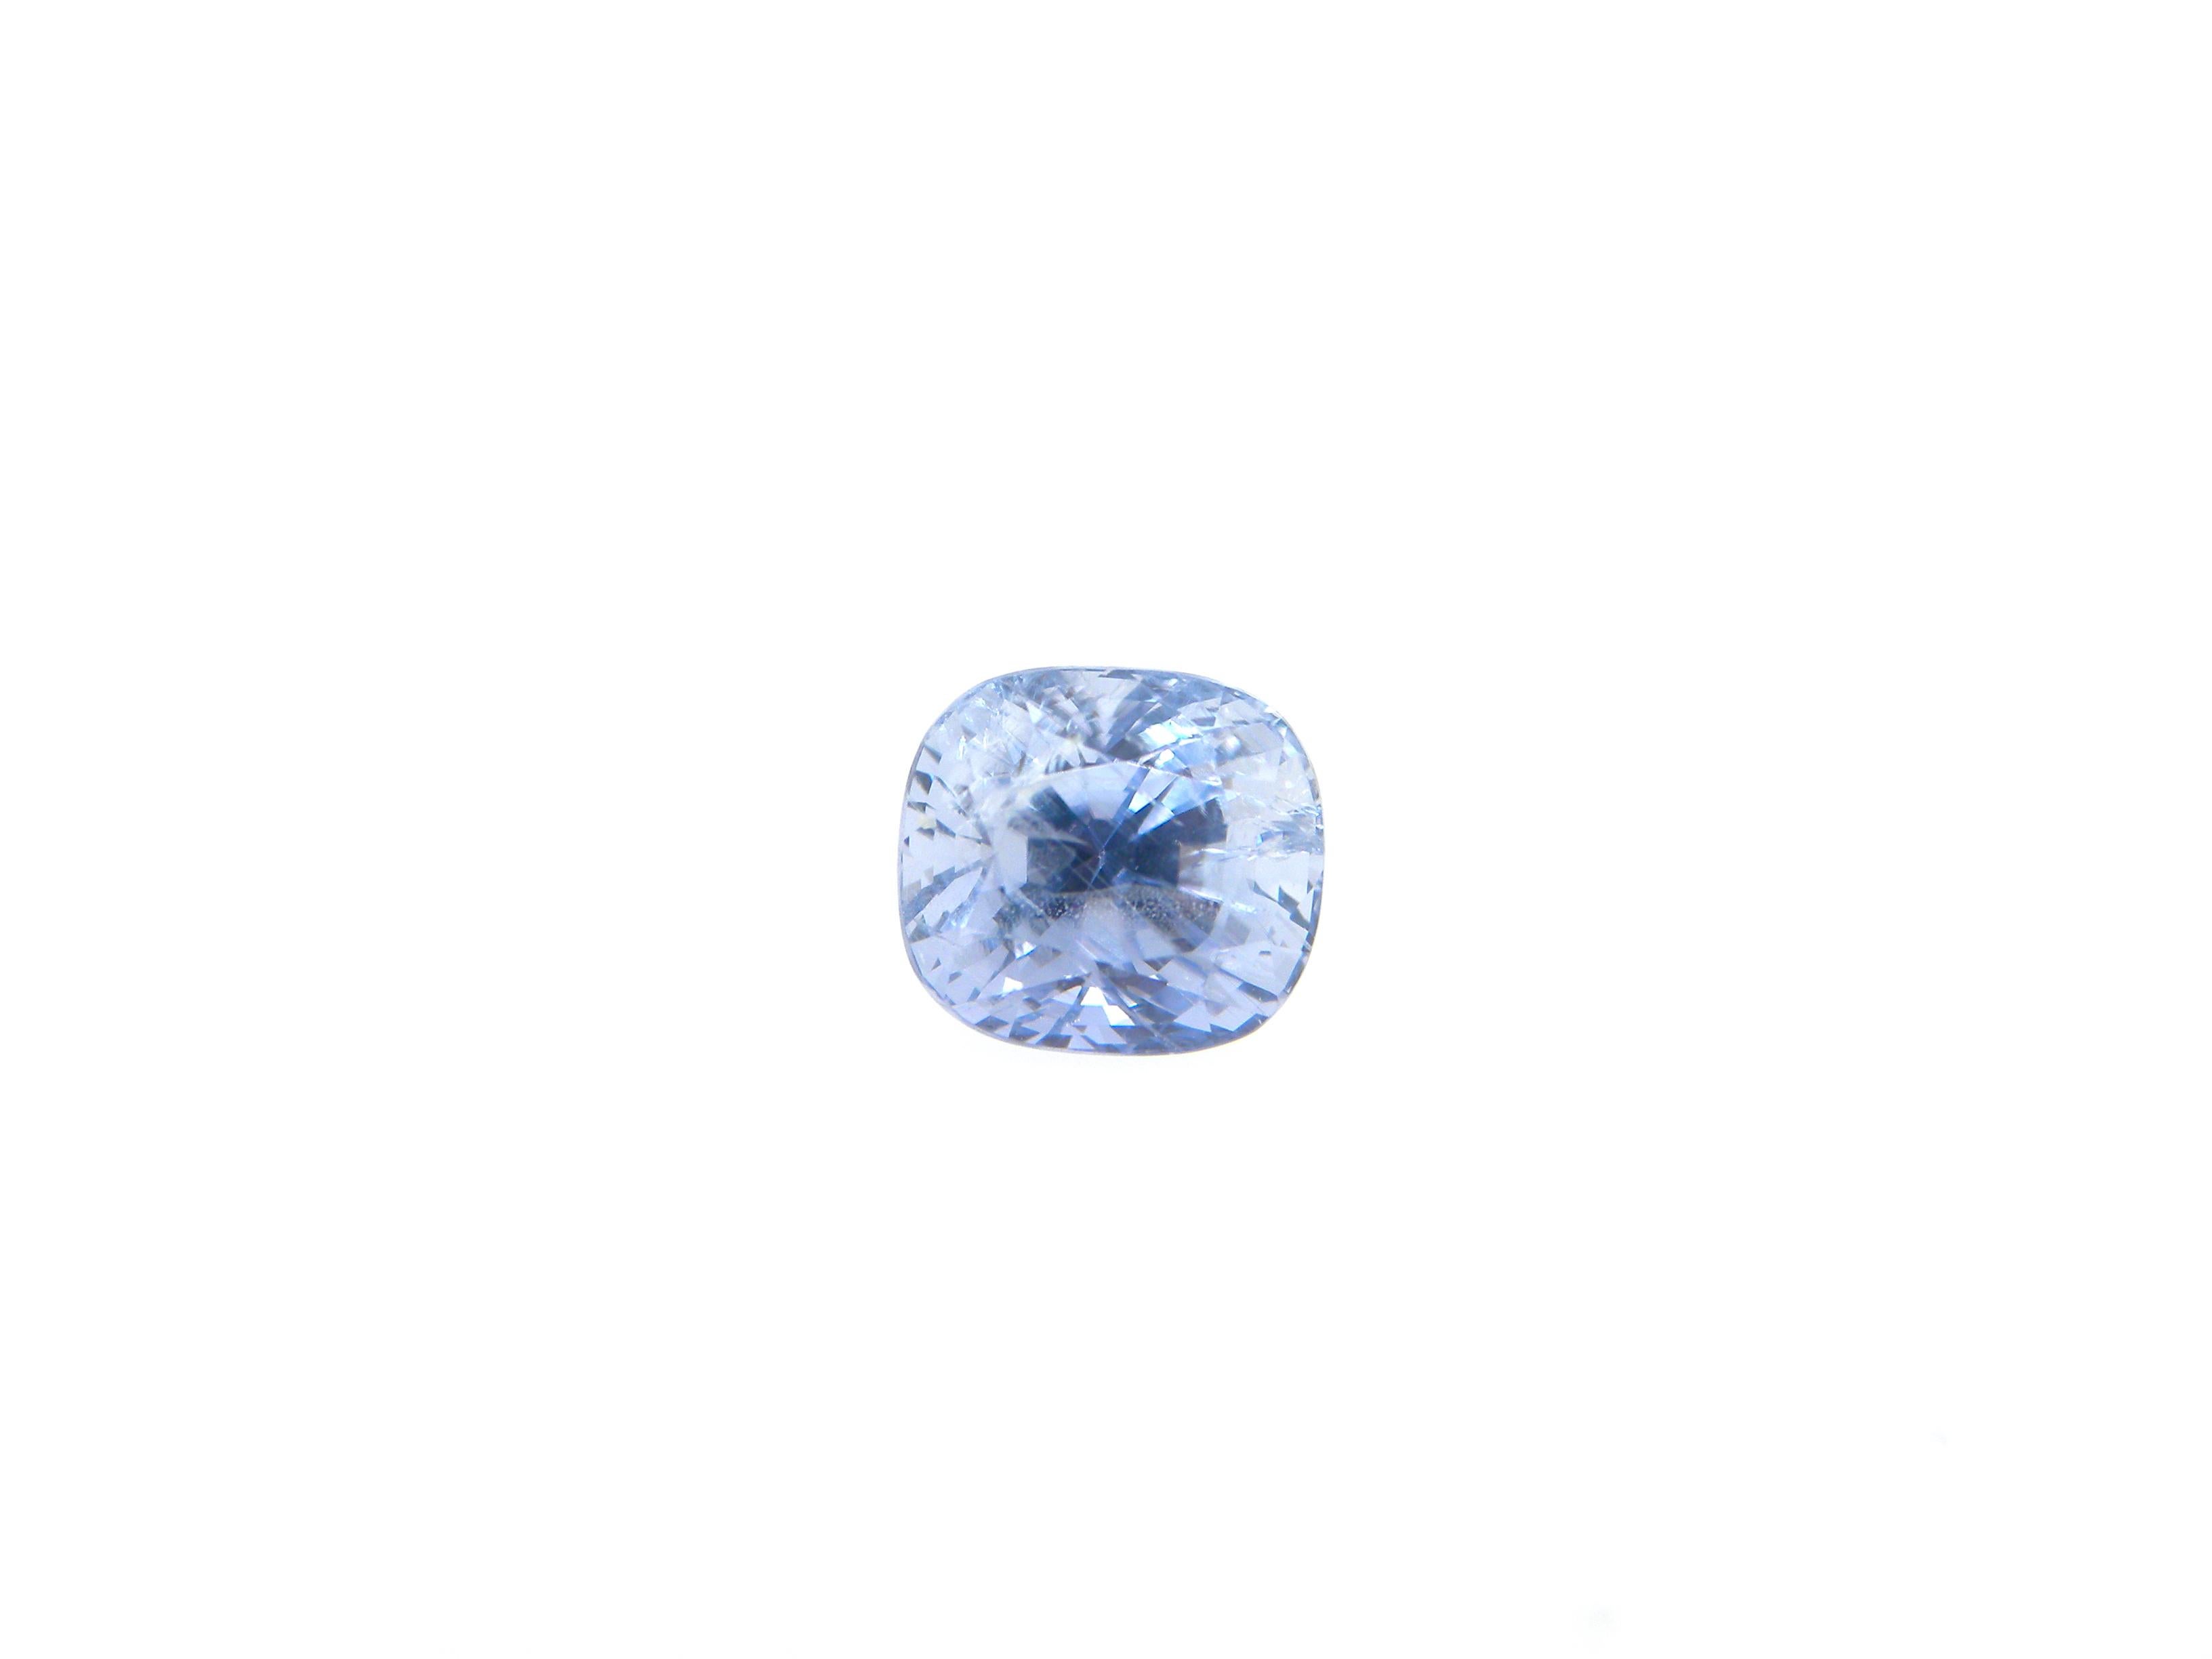 3.46 Carat GIA Certified Cushion-Cut Burma No Heat Blue Sapphire:

A gorgeous gem, it is a 3.46 carat unheated Burmese blue sapphire. Hailing from the historic Mogok mines in Burma as certified by GIA Lab, the sapphire possesses a soothing blue